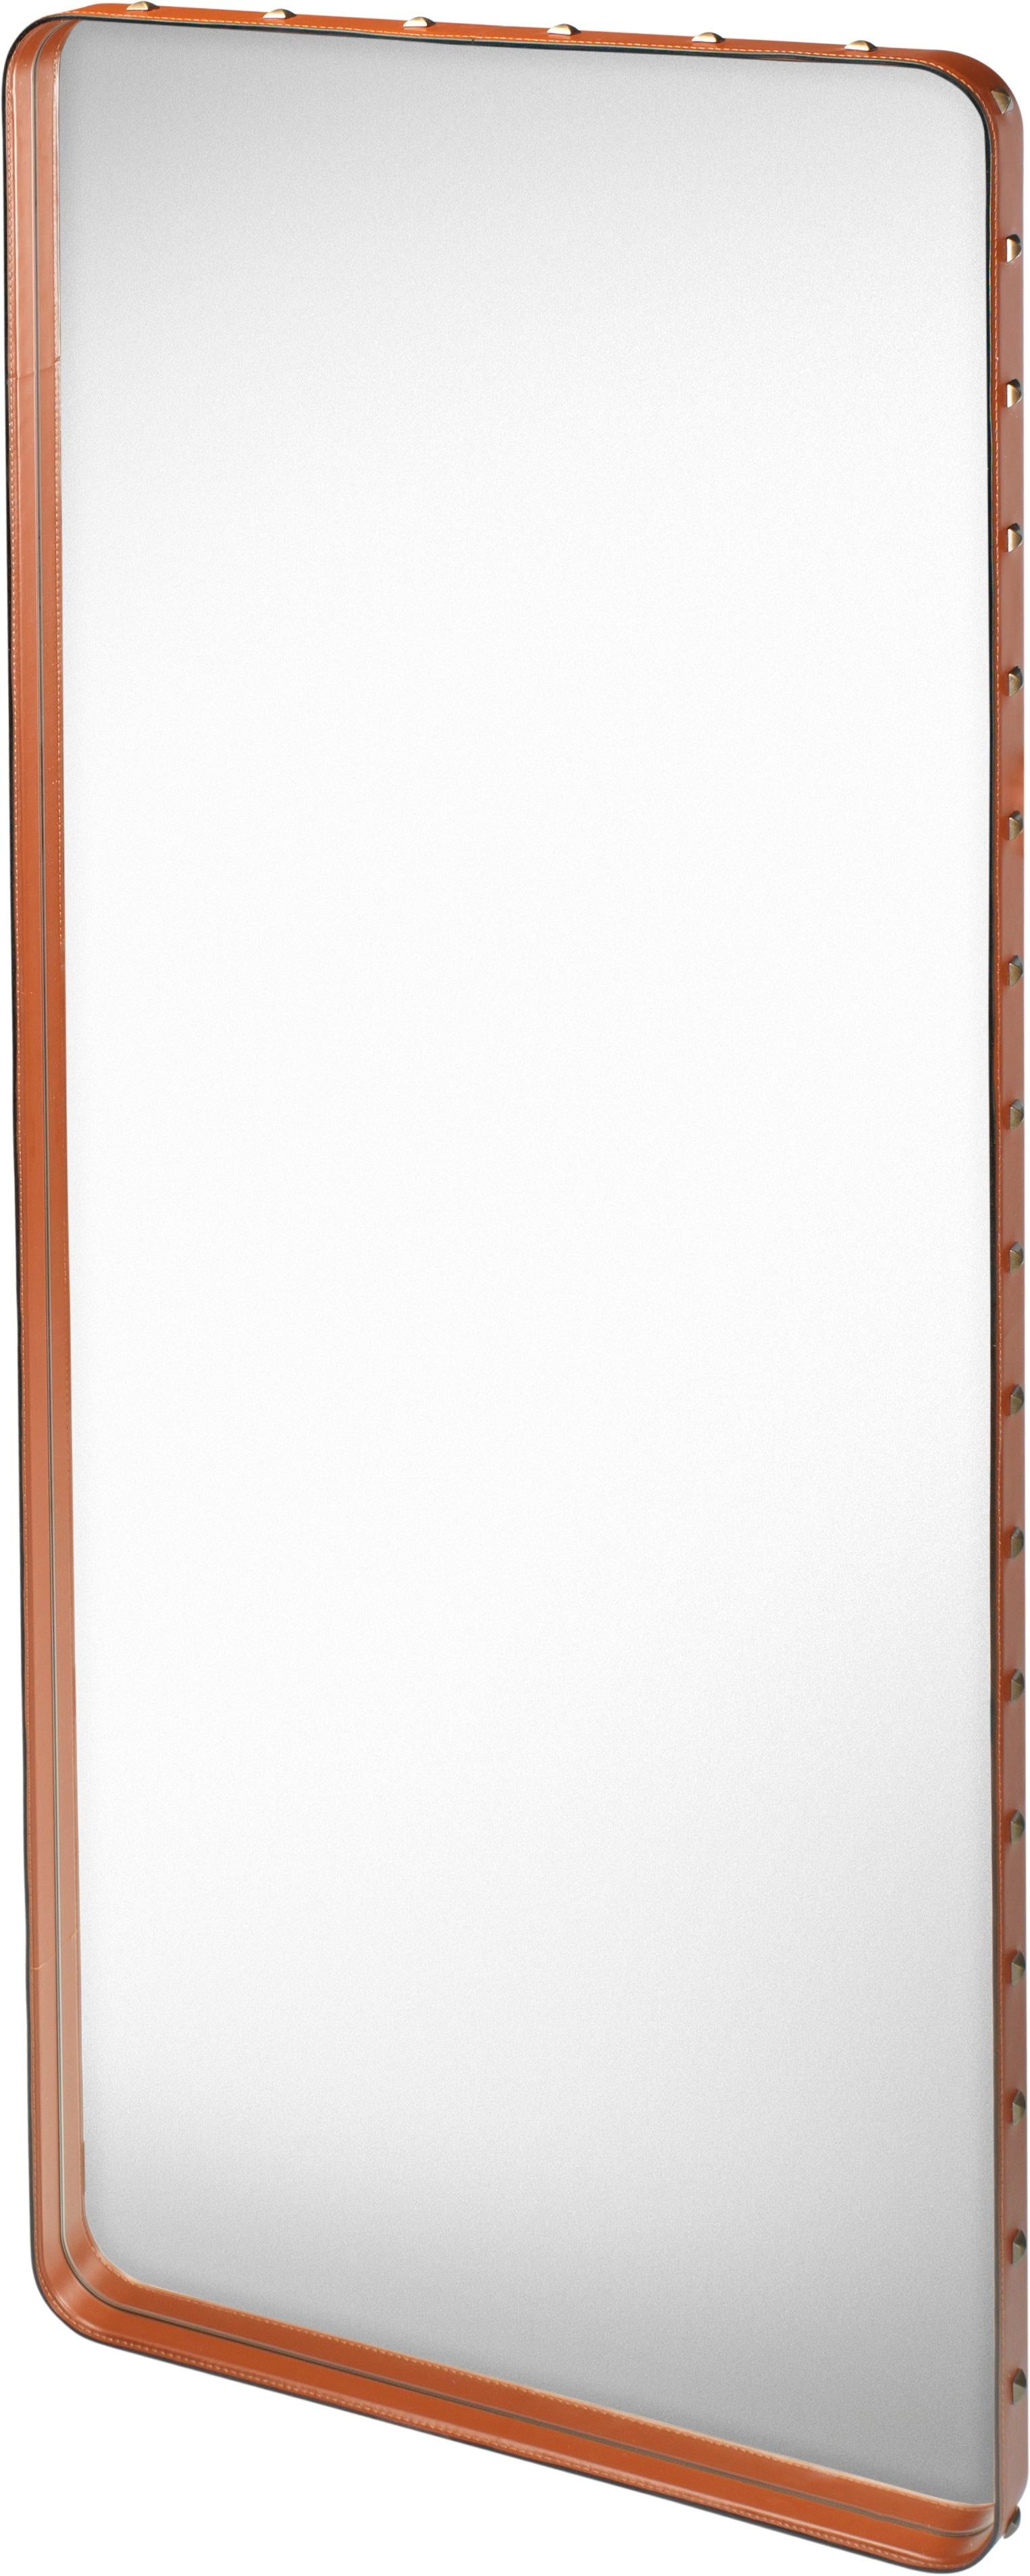 Brass Small Jacques Adnet 'Rectangulaire' Wall Mirror in Black Leather for GUBI